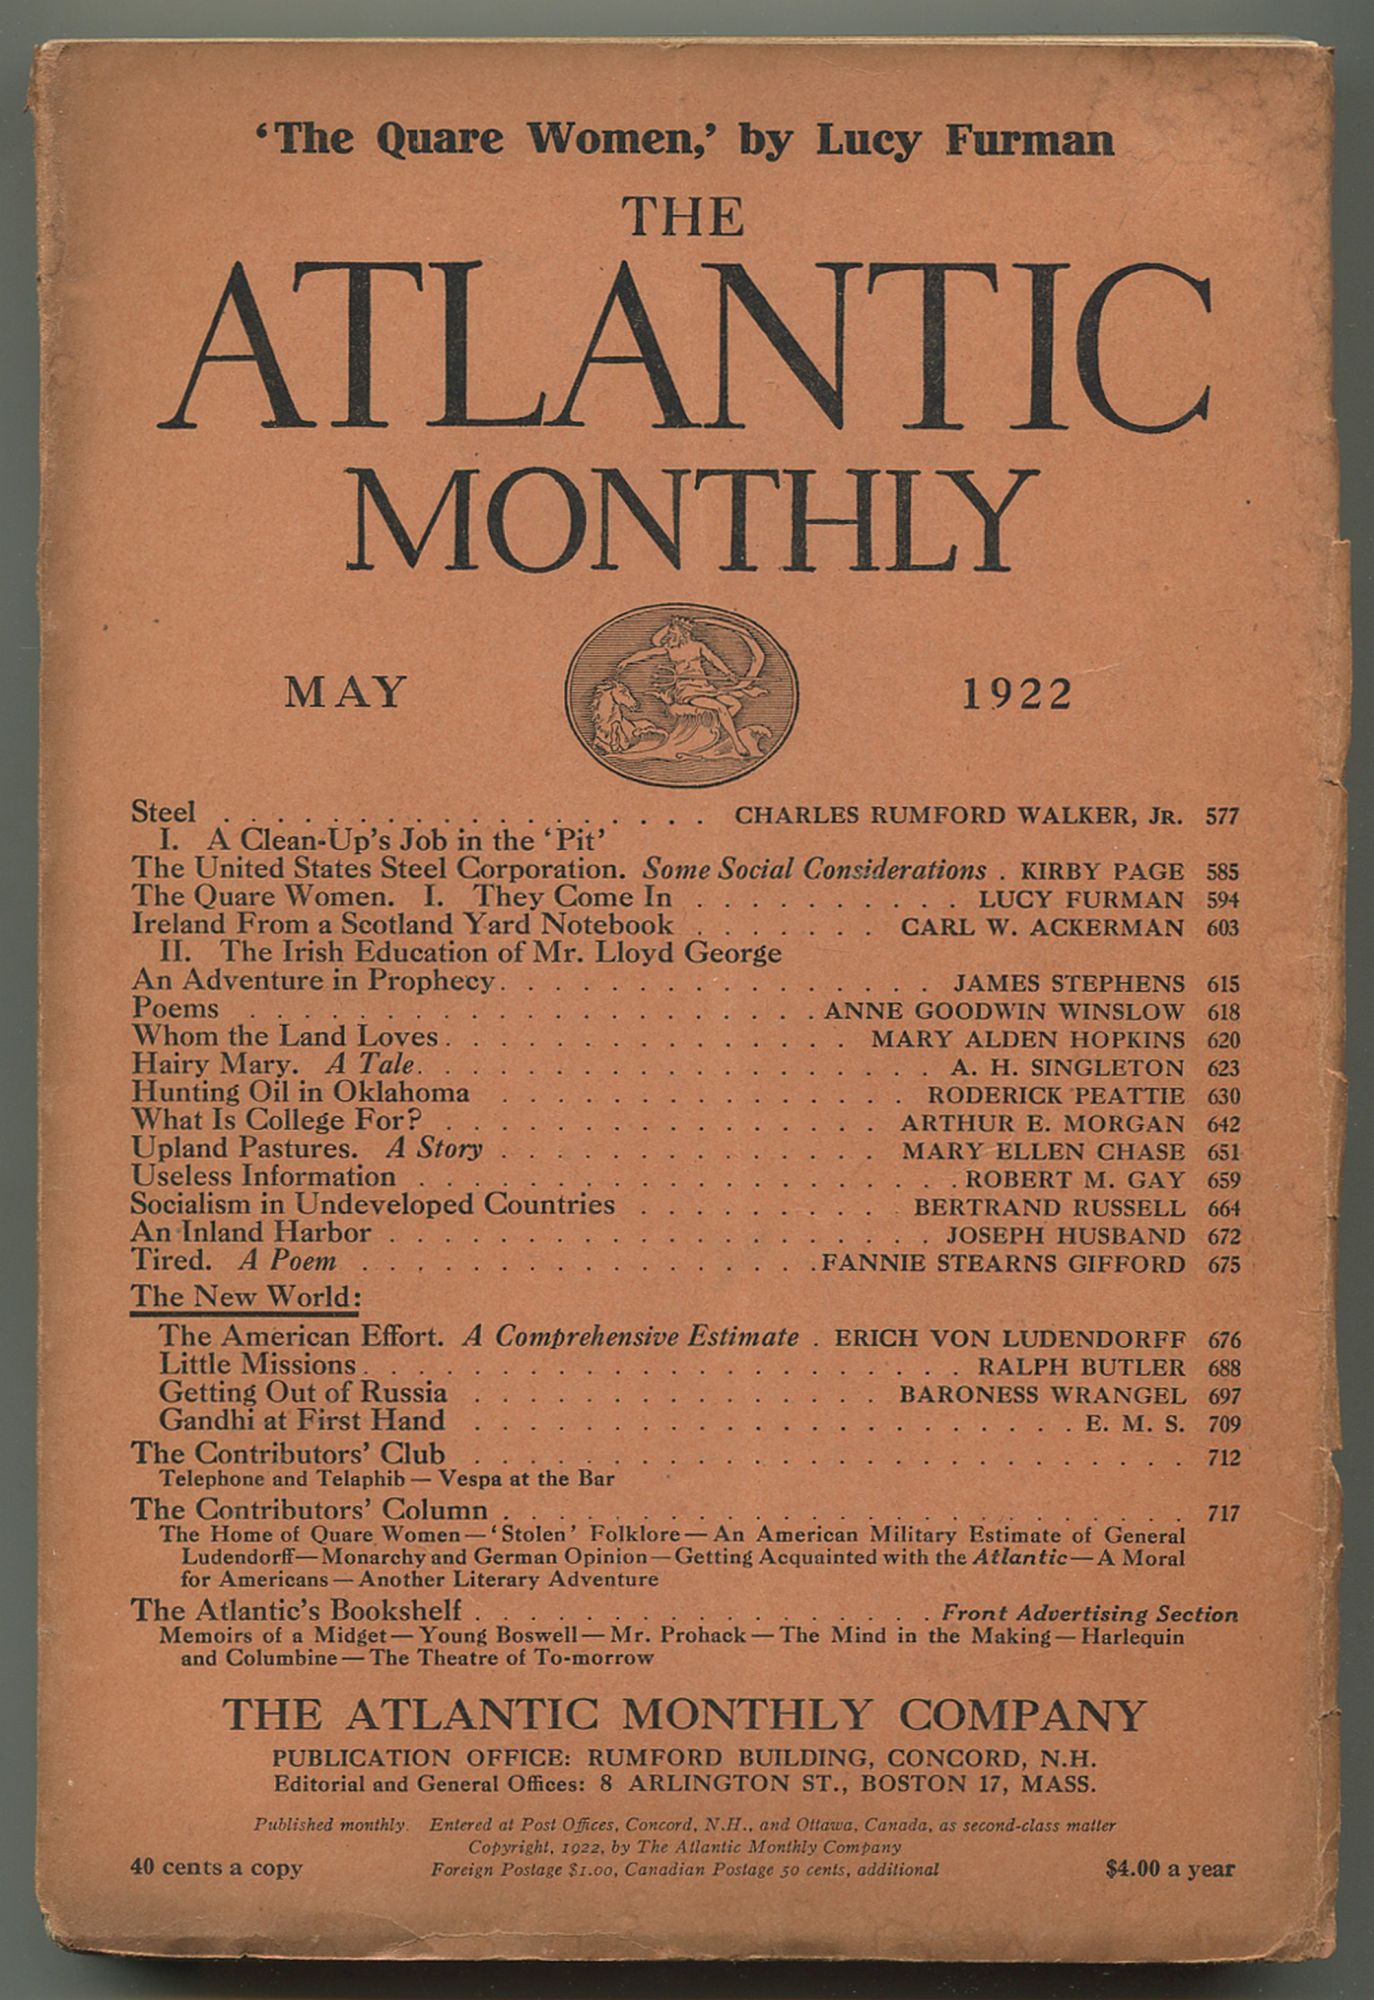 Atlantic　No.　129,　Covers-Rare　1922,　Good　the　The　May　Inc.　Between　Softcover　ABAA　Monthly　(1922)　Vol.　5:　Very　Books,